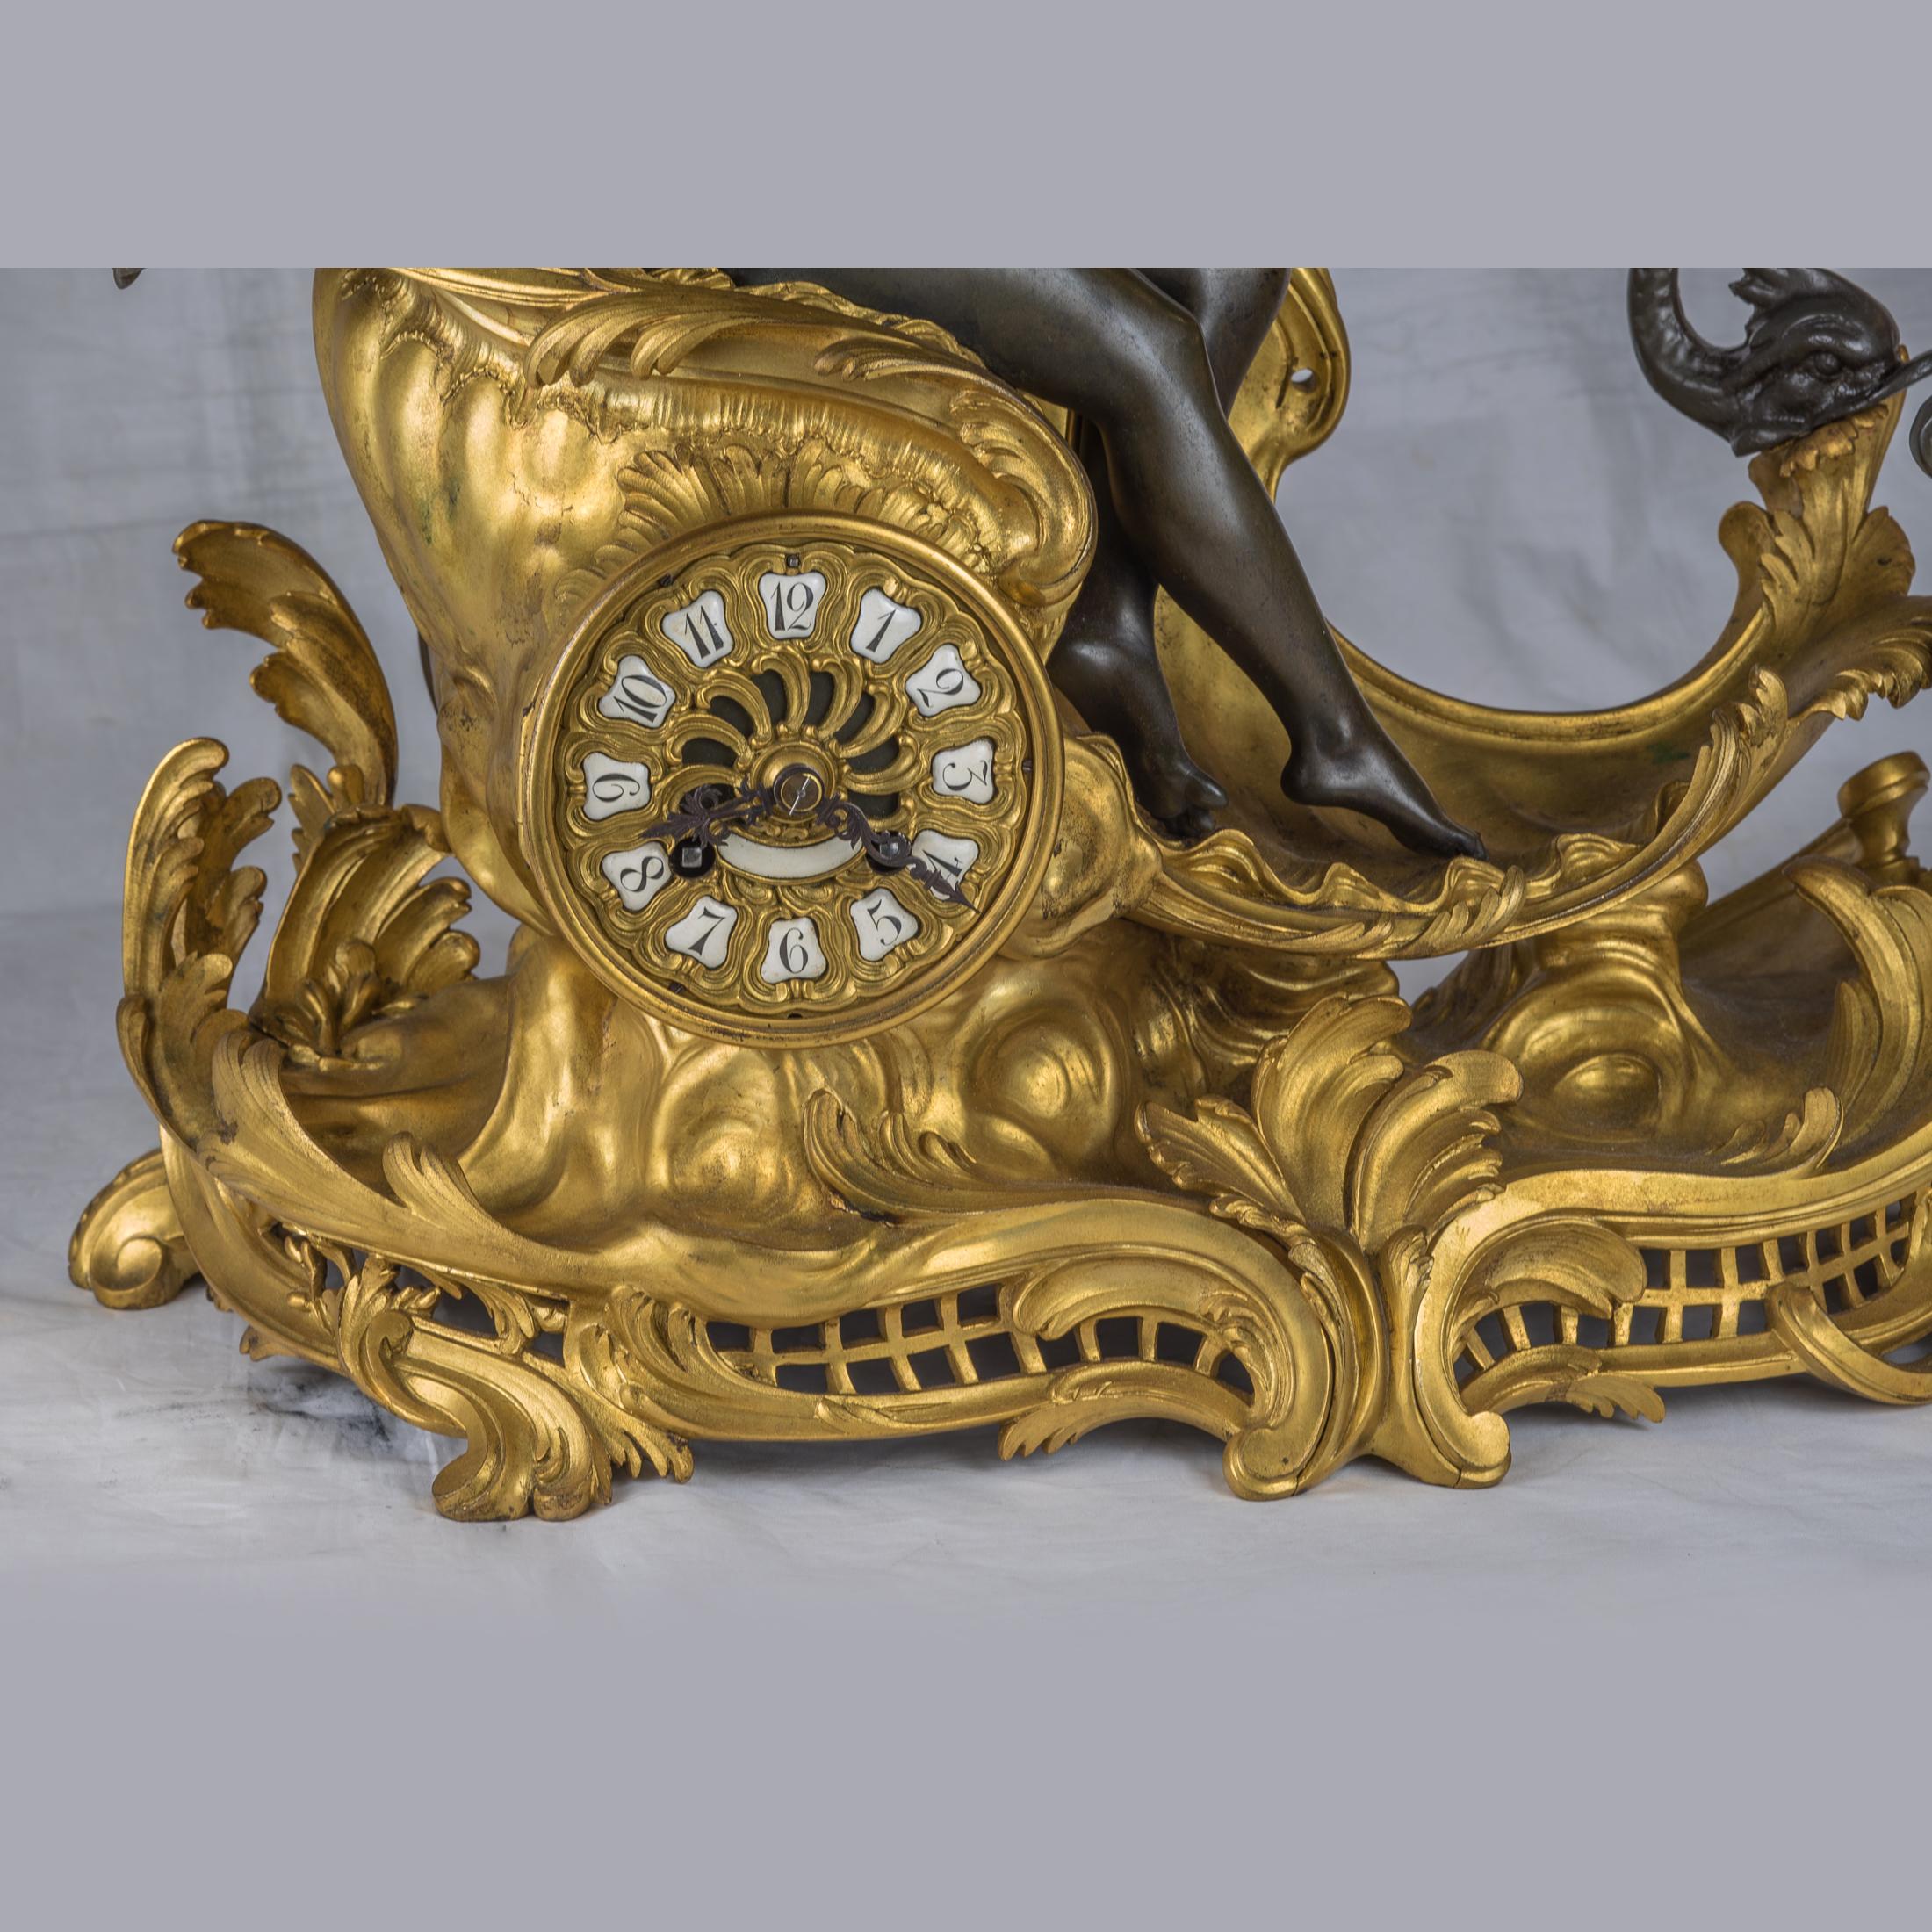 19th Century French Ormolu Figural Mantel Clock Depicting Amphitrite's Chariot For Sale